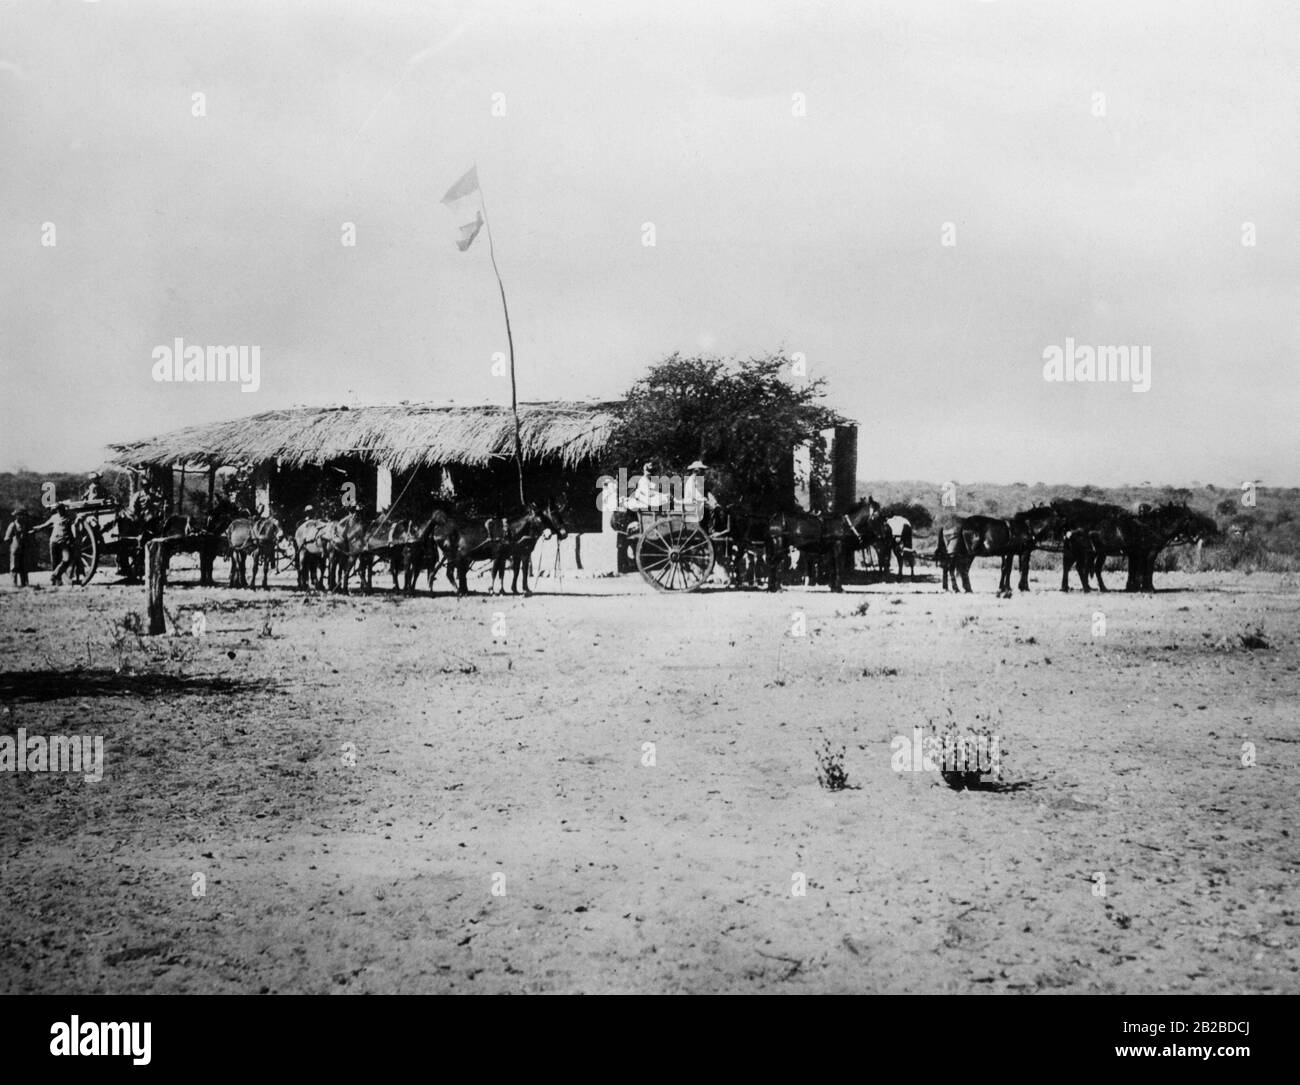 The German station Otjitno, 50 km from Grootfontein. It was invaded on January 17, 1904 by the insurgent Herero, who are fighting against the German occupiers. Stock Photo